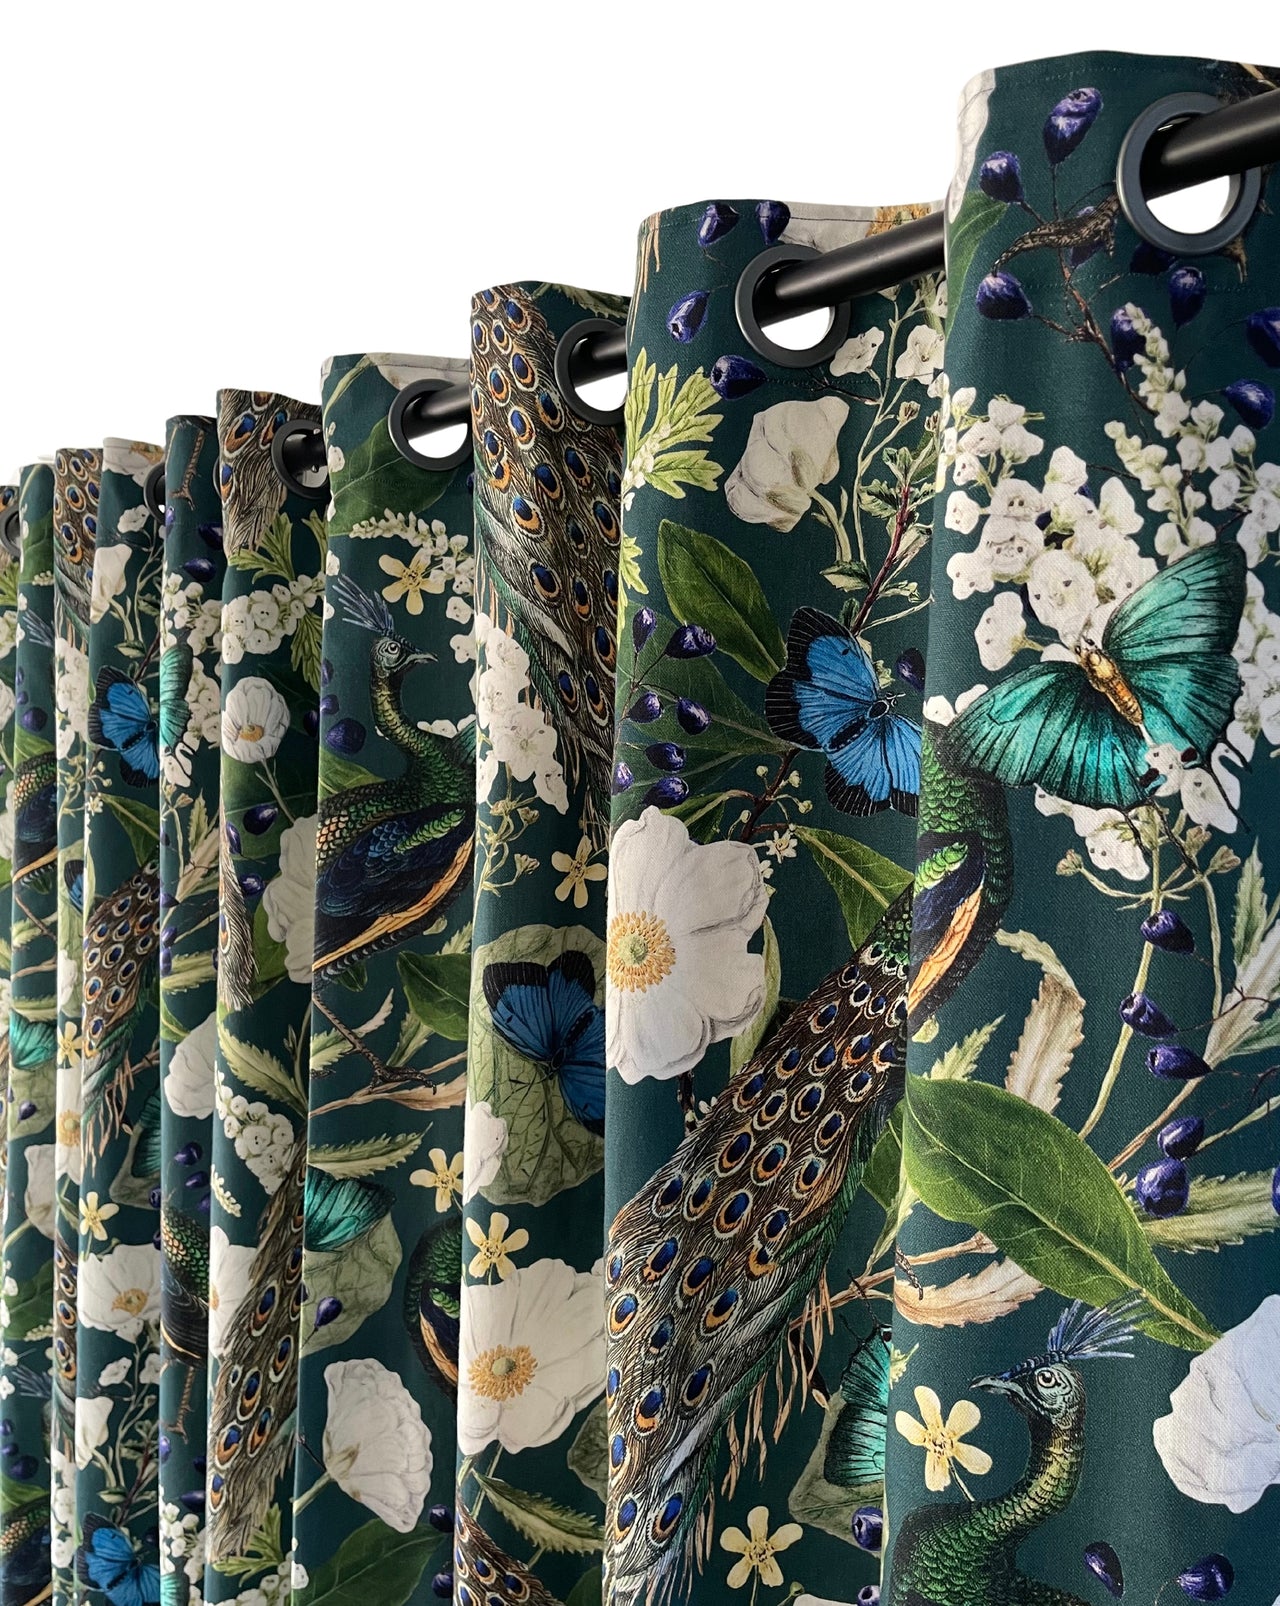 Peacock Printed Cotton Fabric by Meter / Botanical Floral Pattern Birds and Butterflies